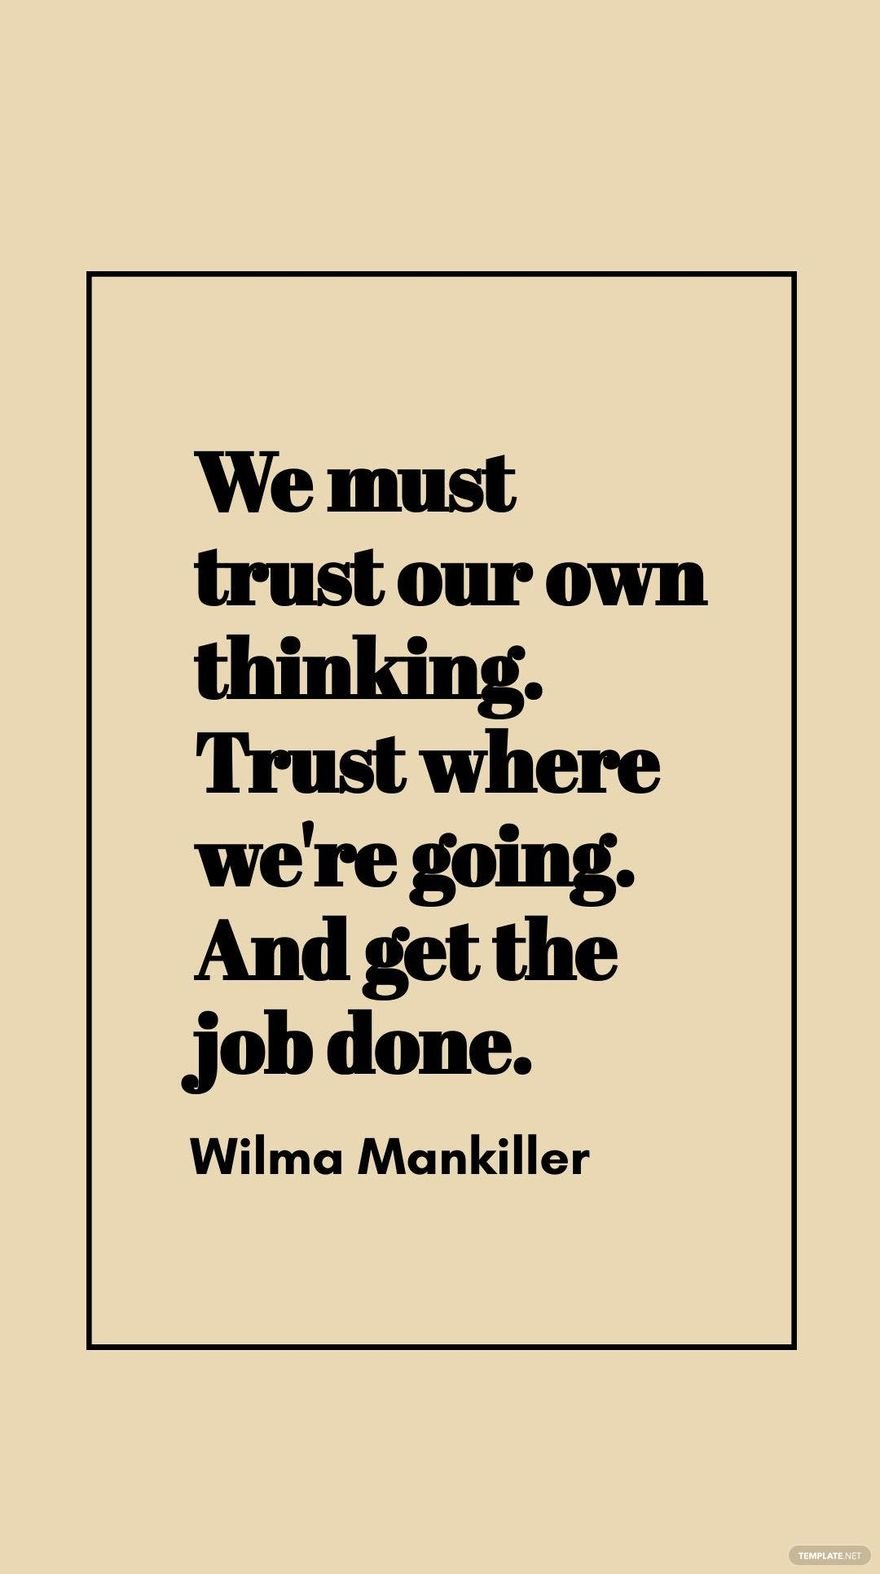 Wilma Mankiller - We must trust our own thinking. Trust where we're going. And get the job done. in JPG